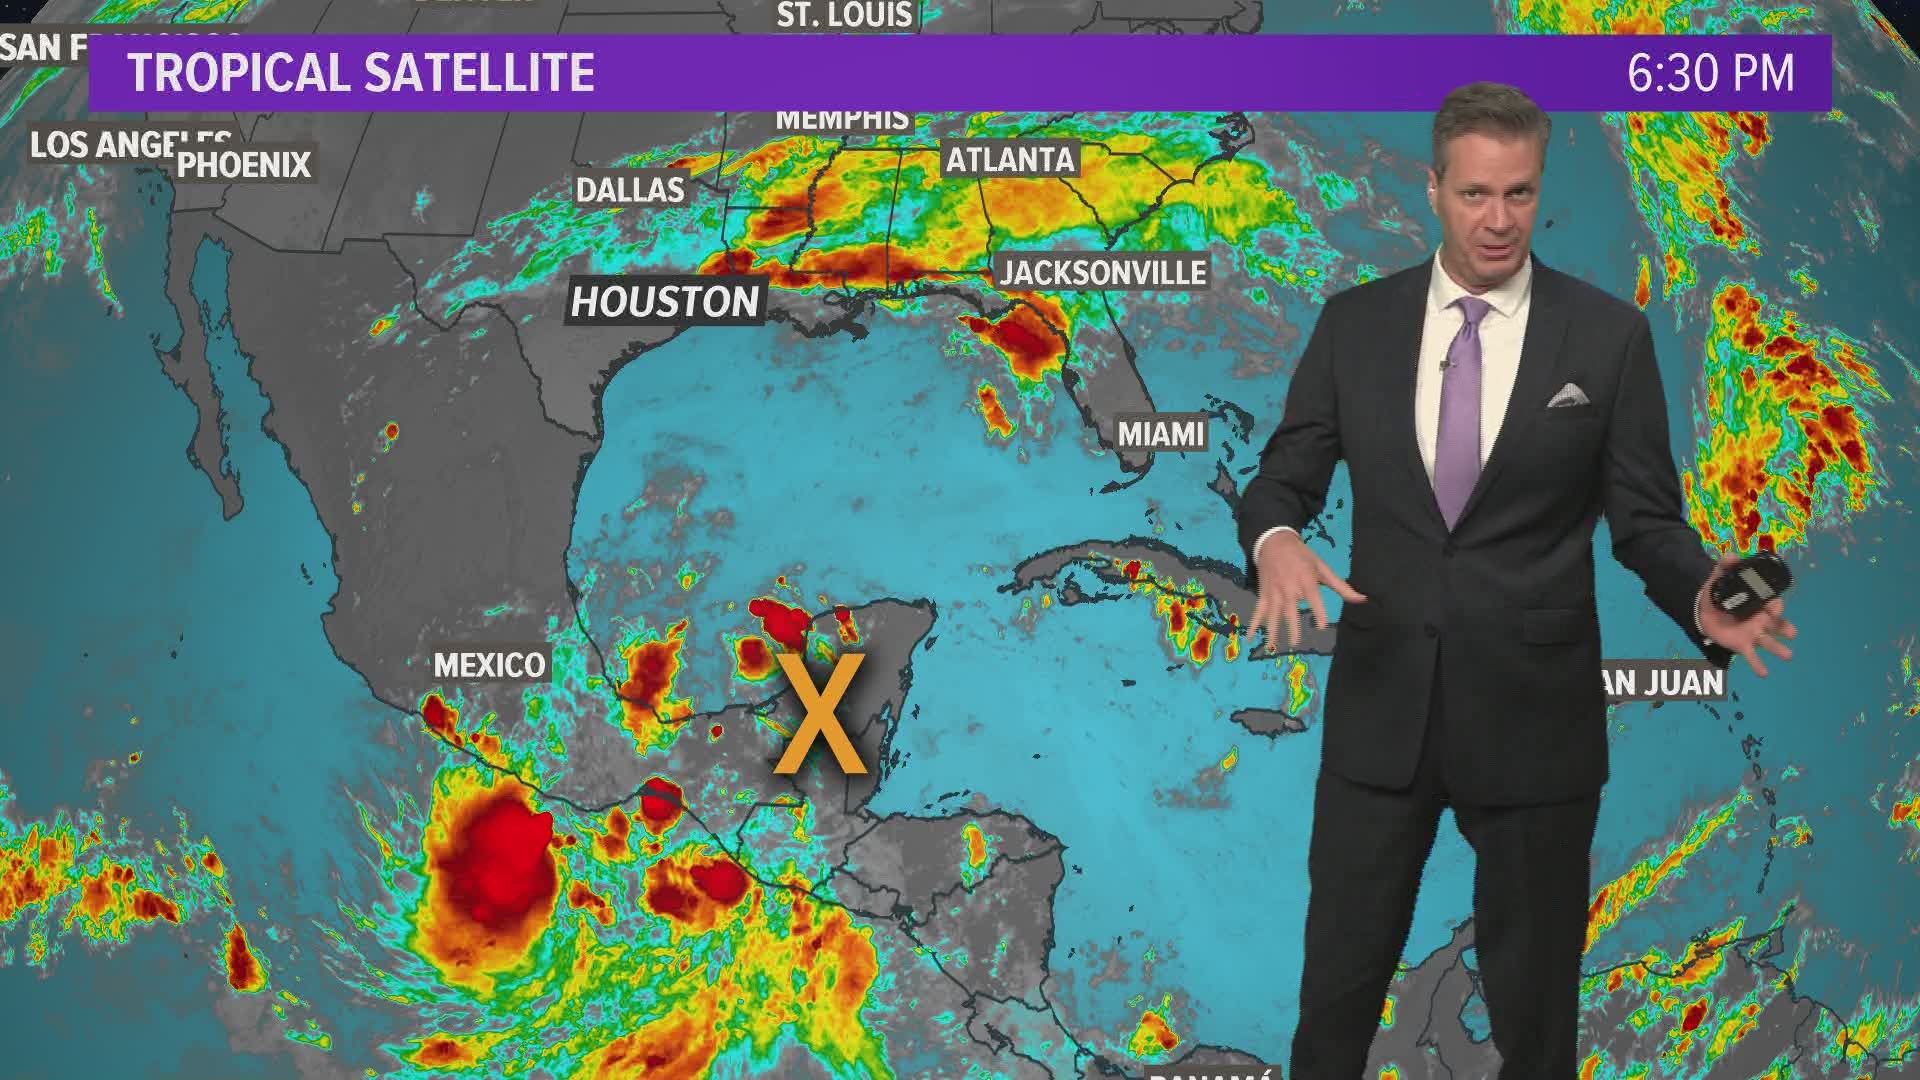 A new tropical storm (Nestor) could form during the next 48 hours